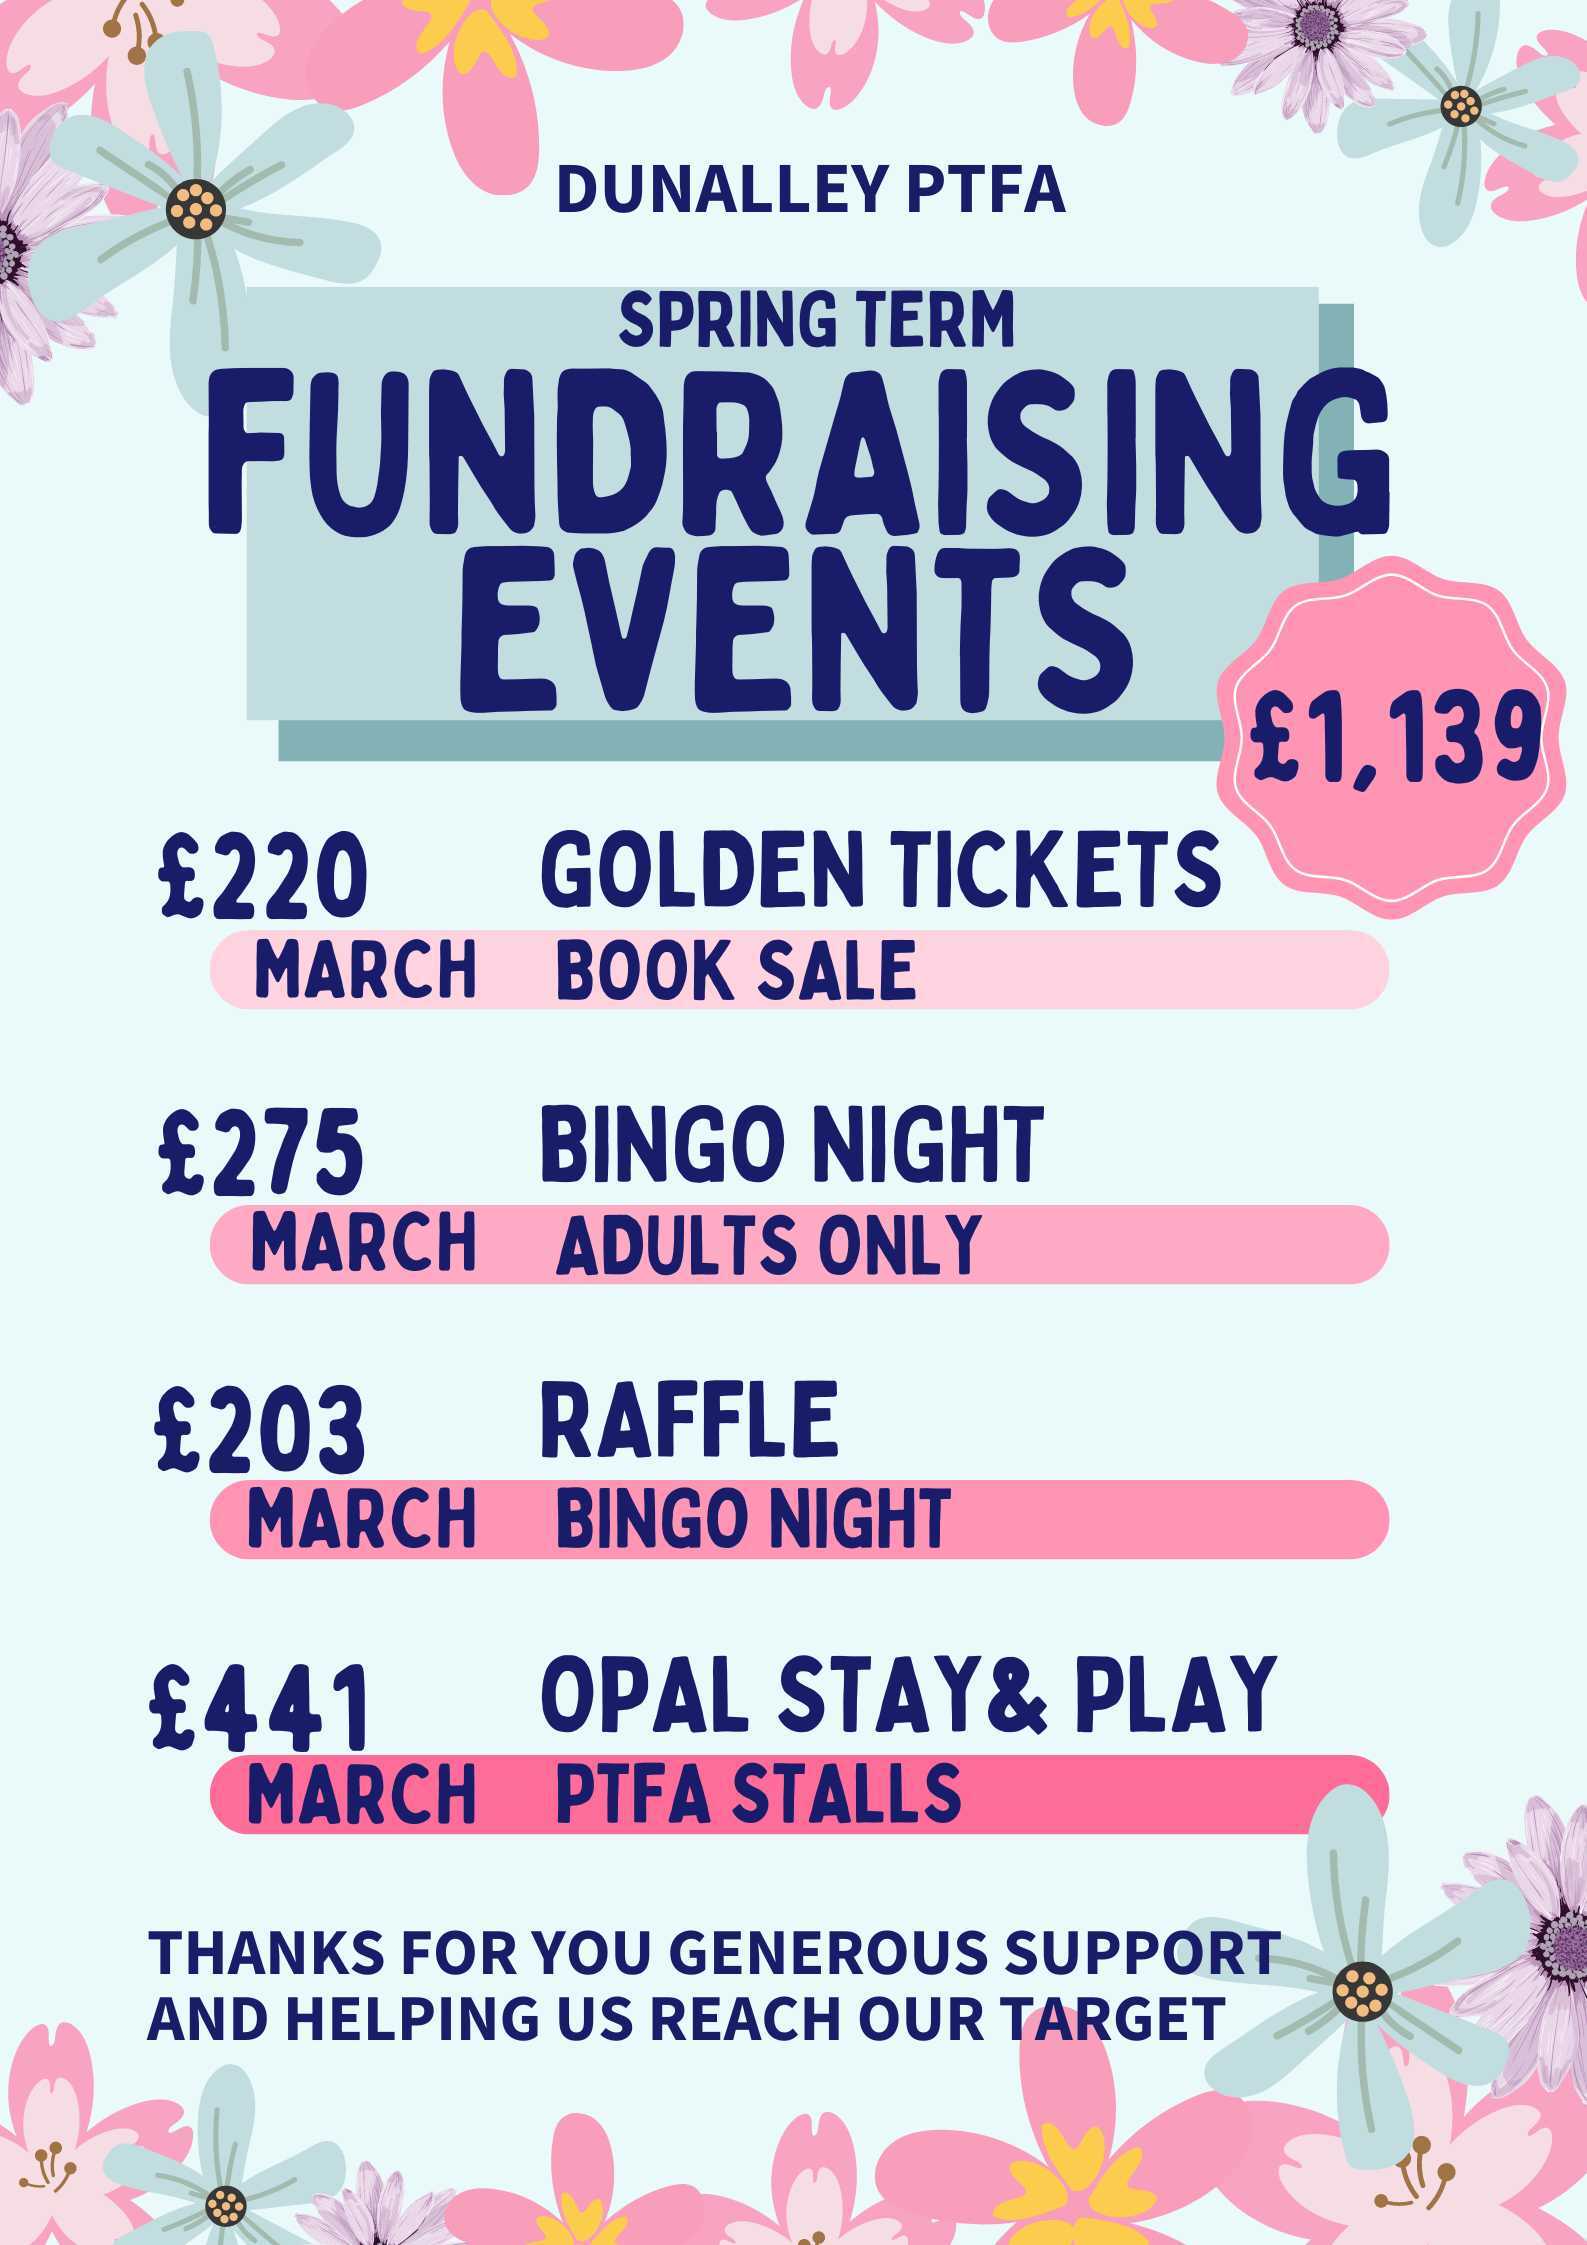 Fundraising Events ££